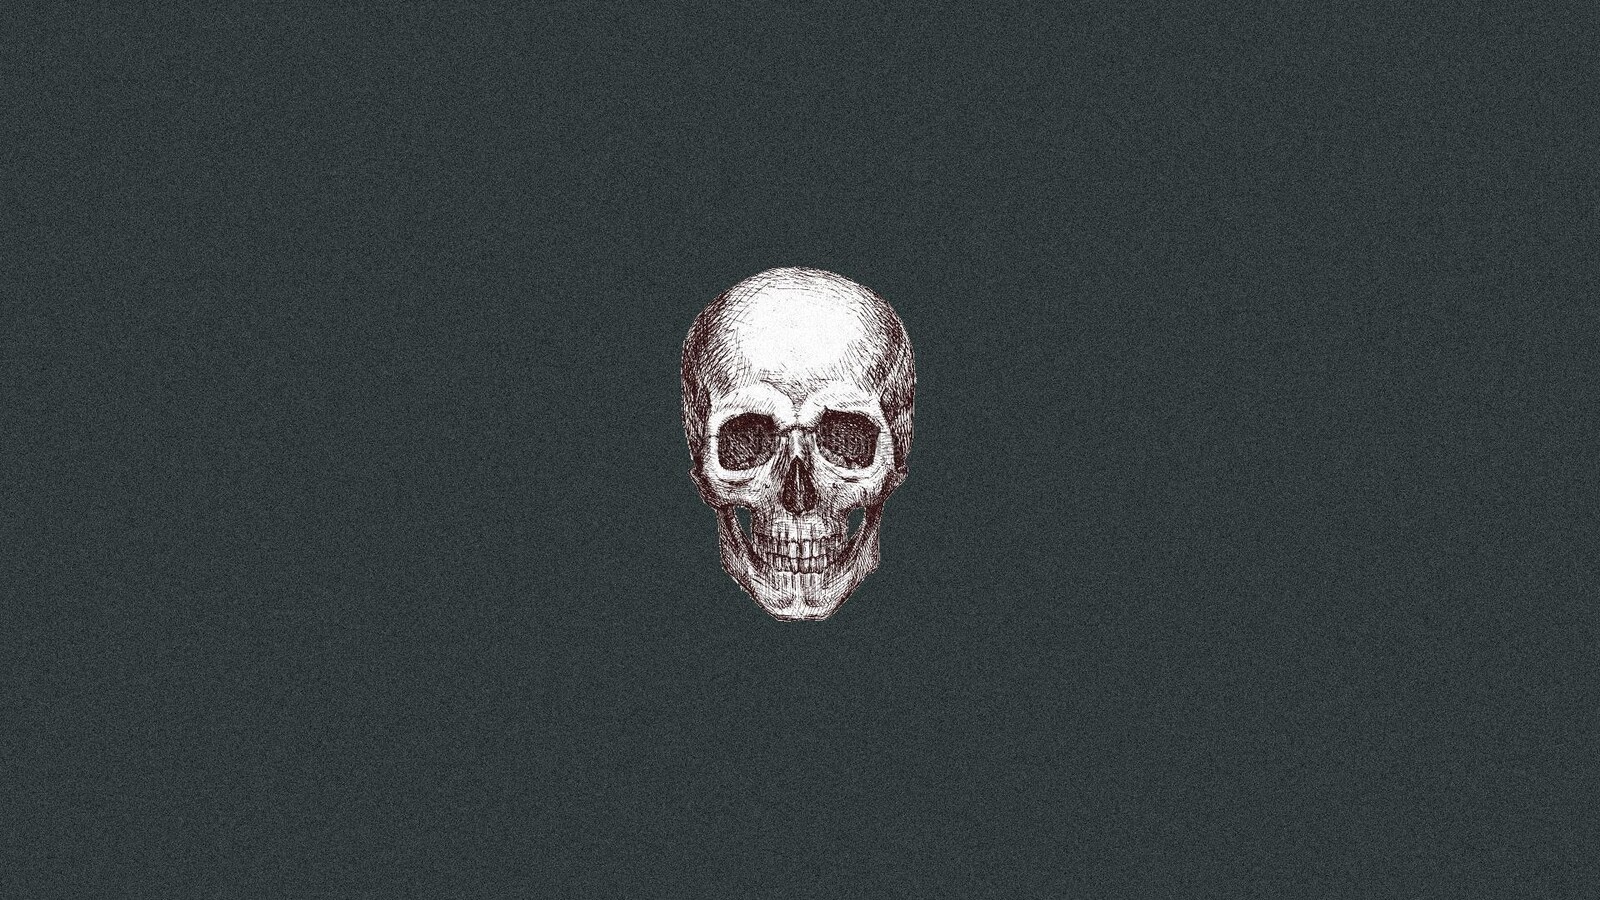 A black and white drawing of an skull - Skeleton